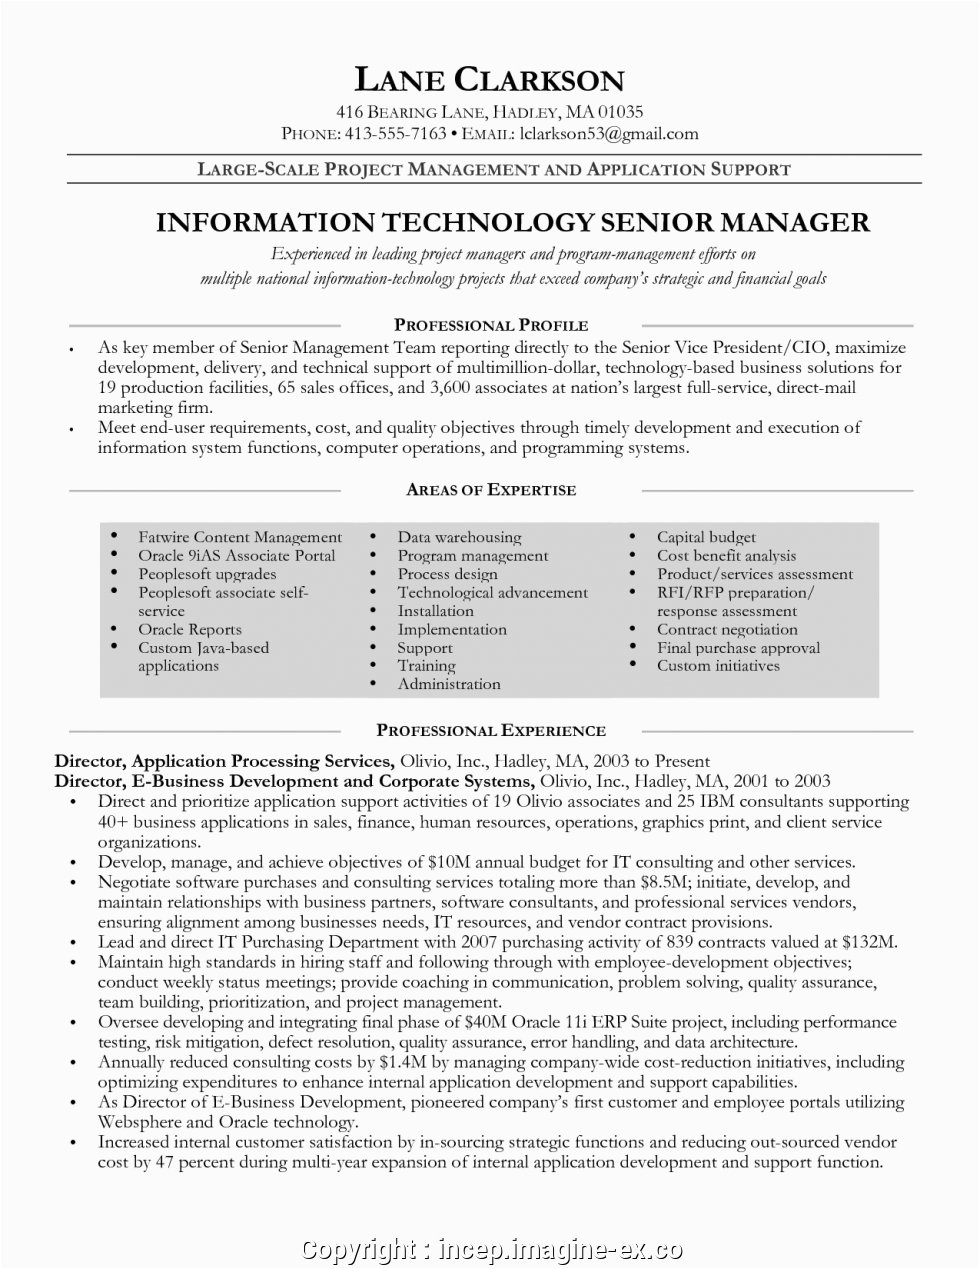 Senior Technical Project Manager Resume Sample New Senior Technical Project Manager Resume Senior Project